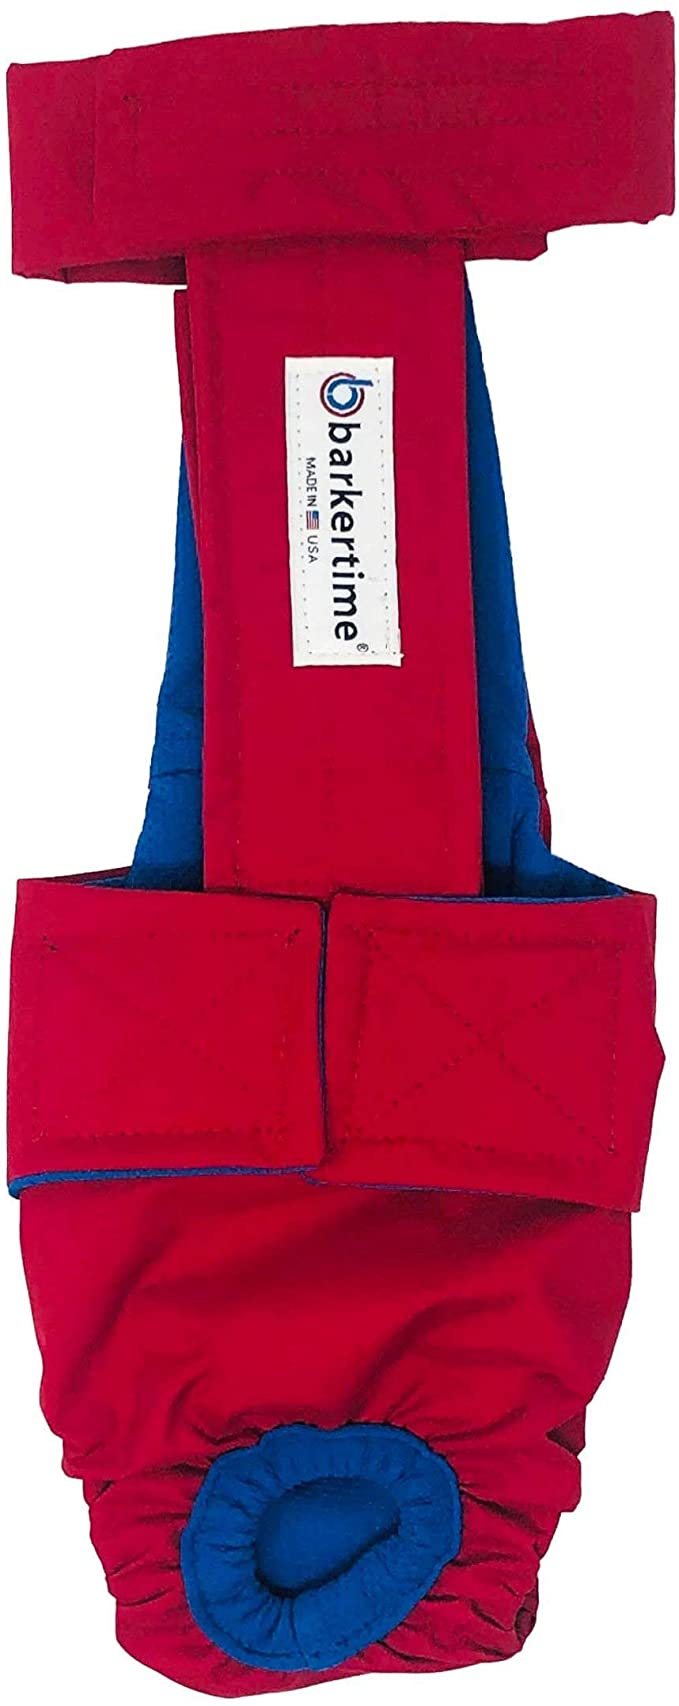 Barkertime Premium Waterproof Dog Diaper Overall - Made in USA - Cherry Red Escape-Proof Premium Waterproof Dog Diaper Overall